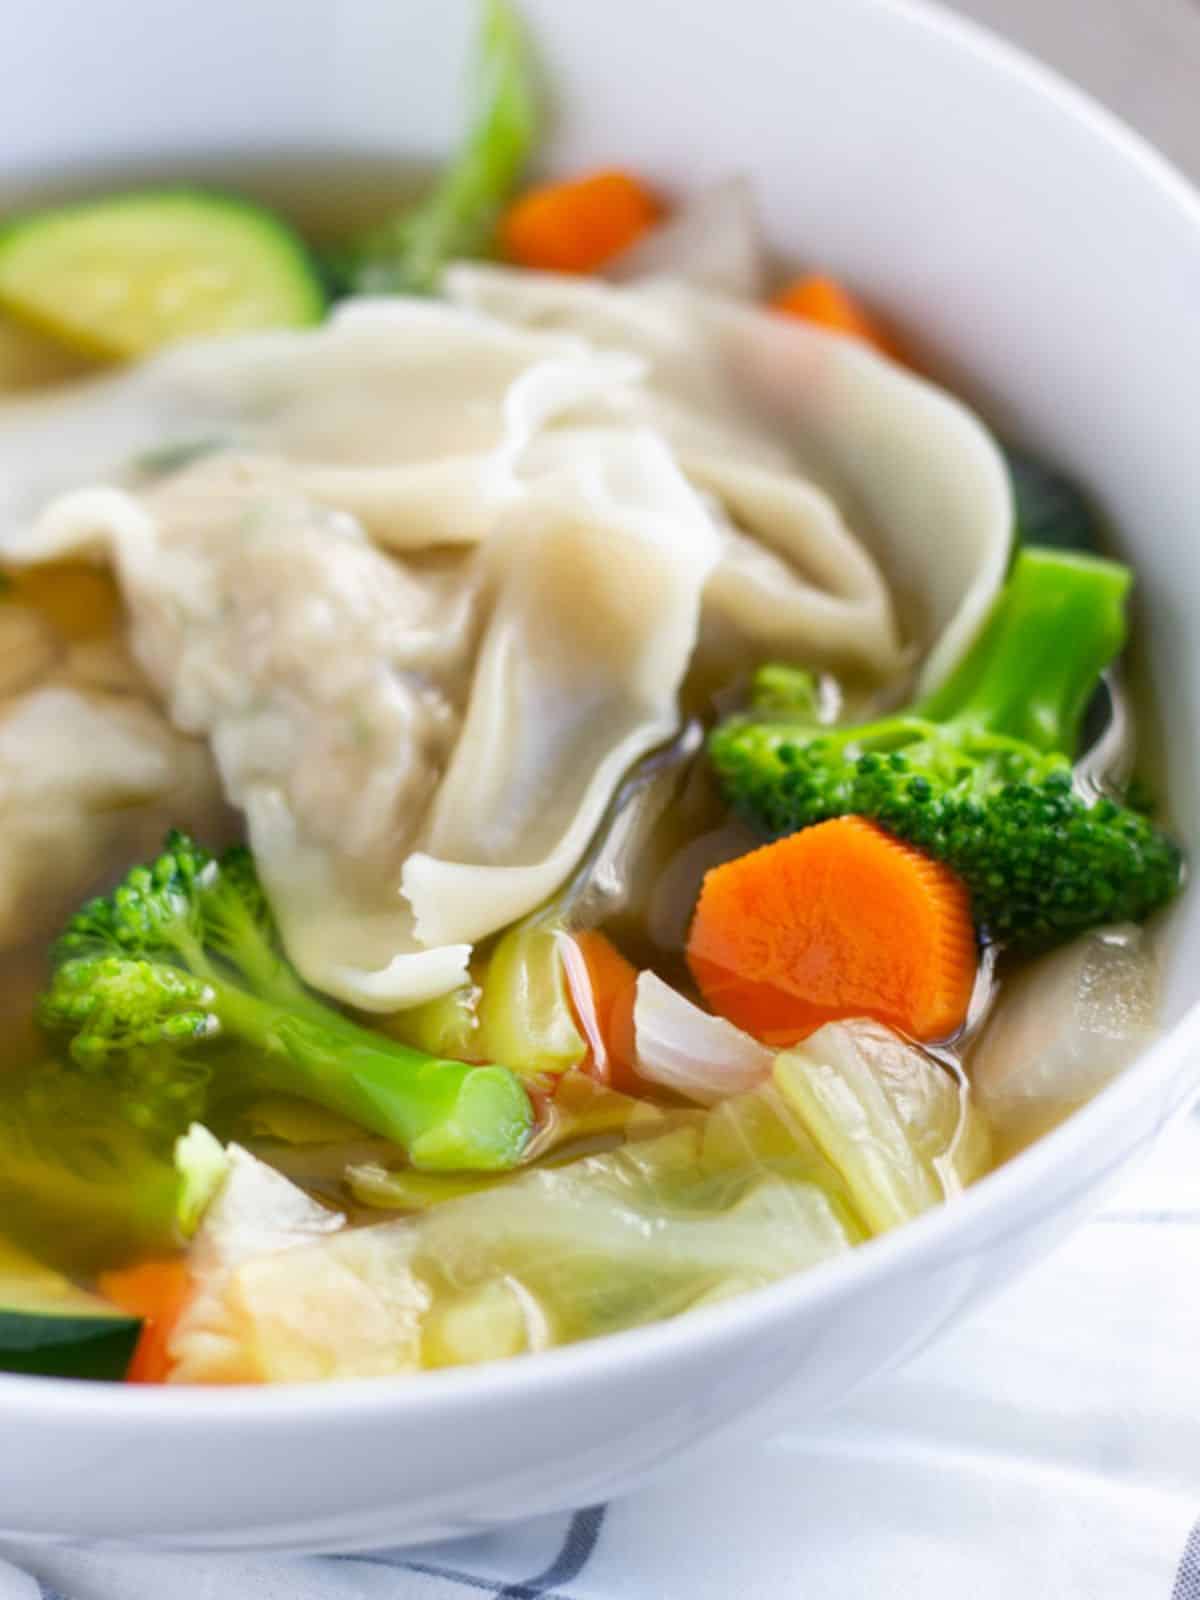 Mixed vegetables and wontons on a bowl with broth.